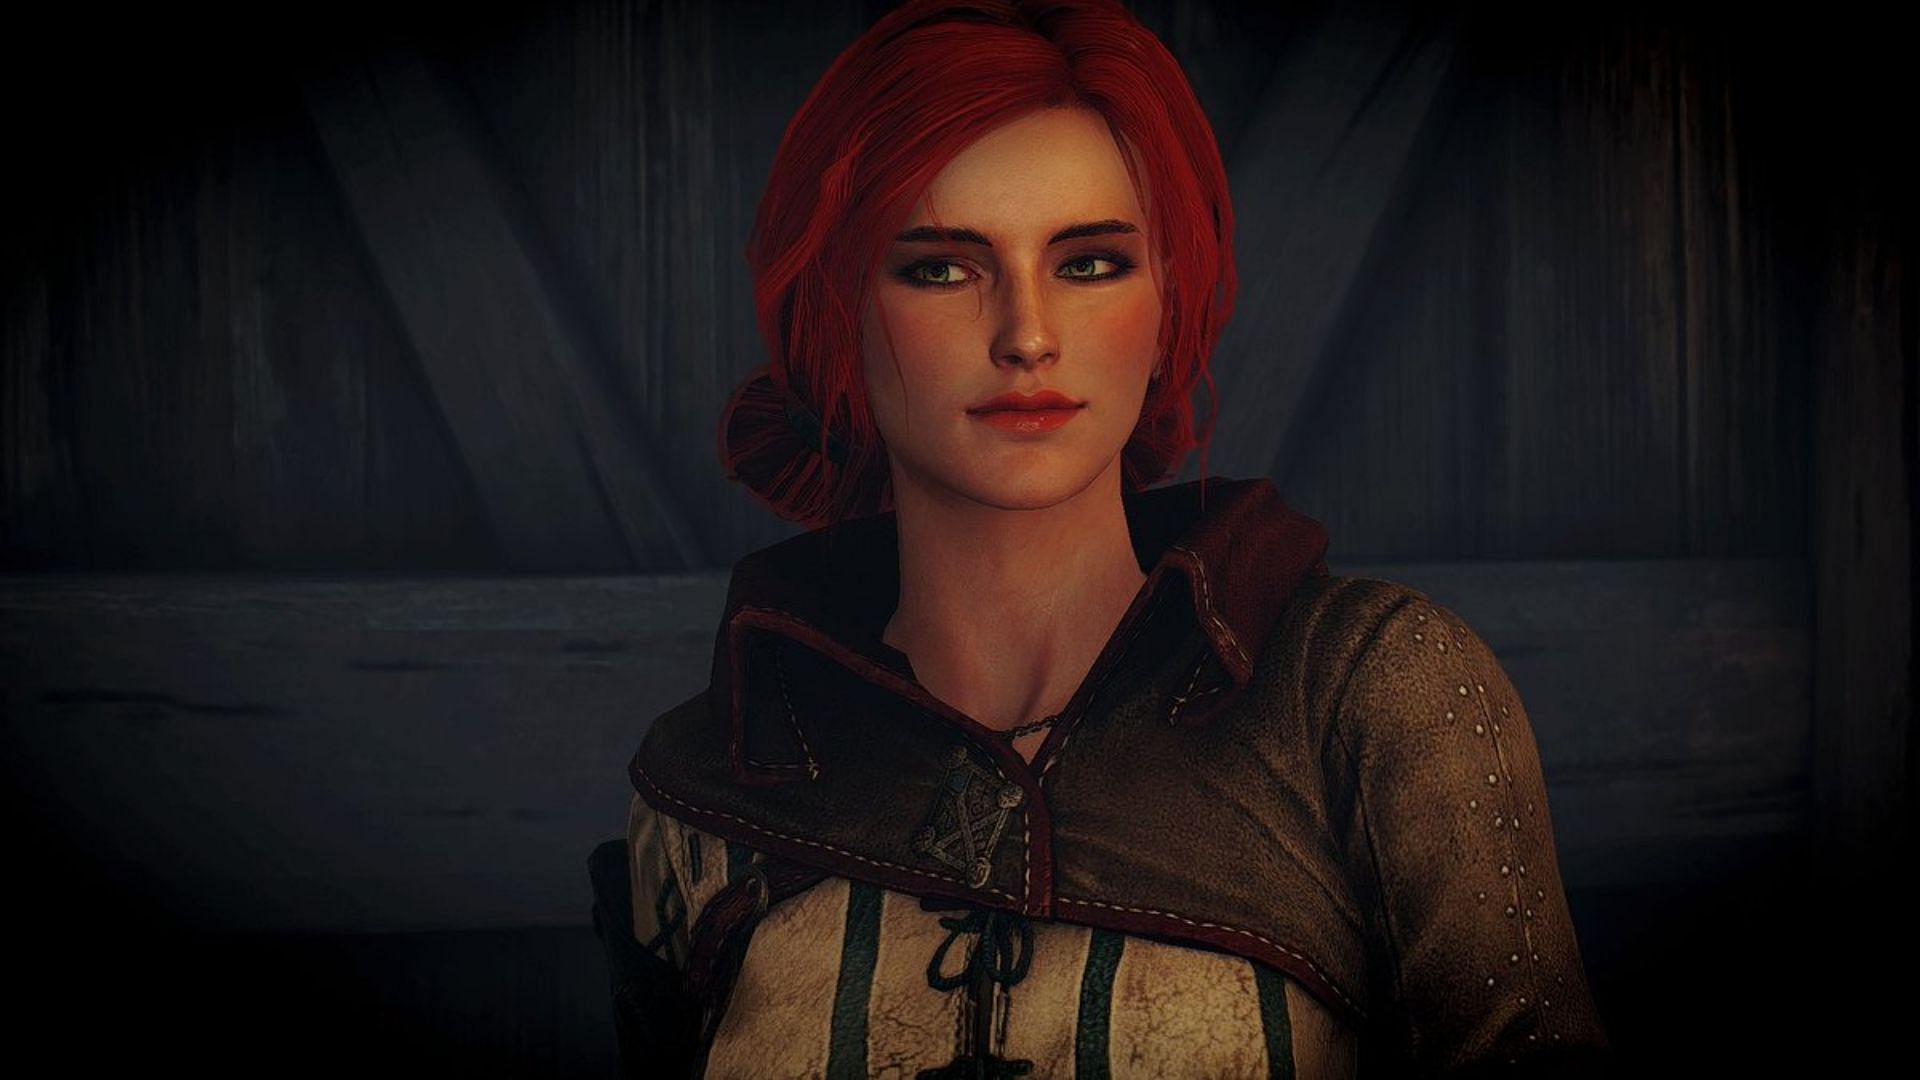 A guide to help you romance Triss in The Witcher 3